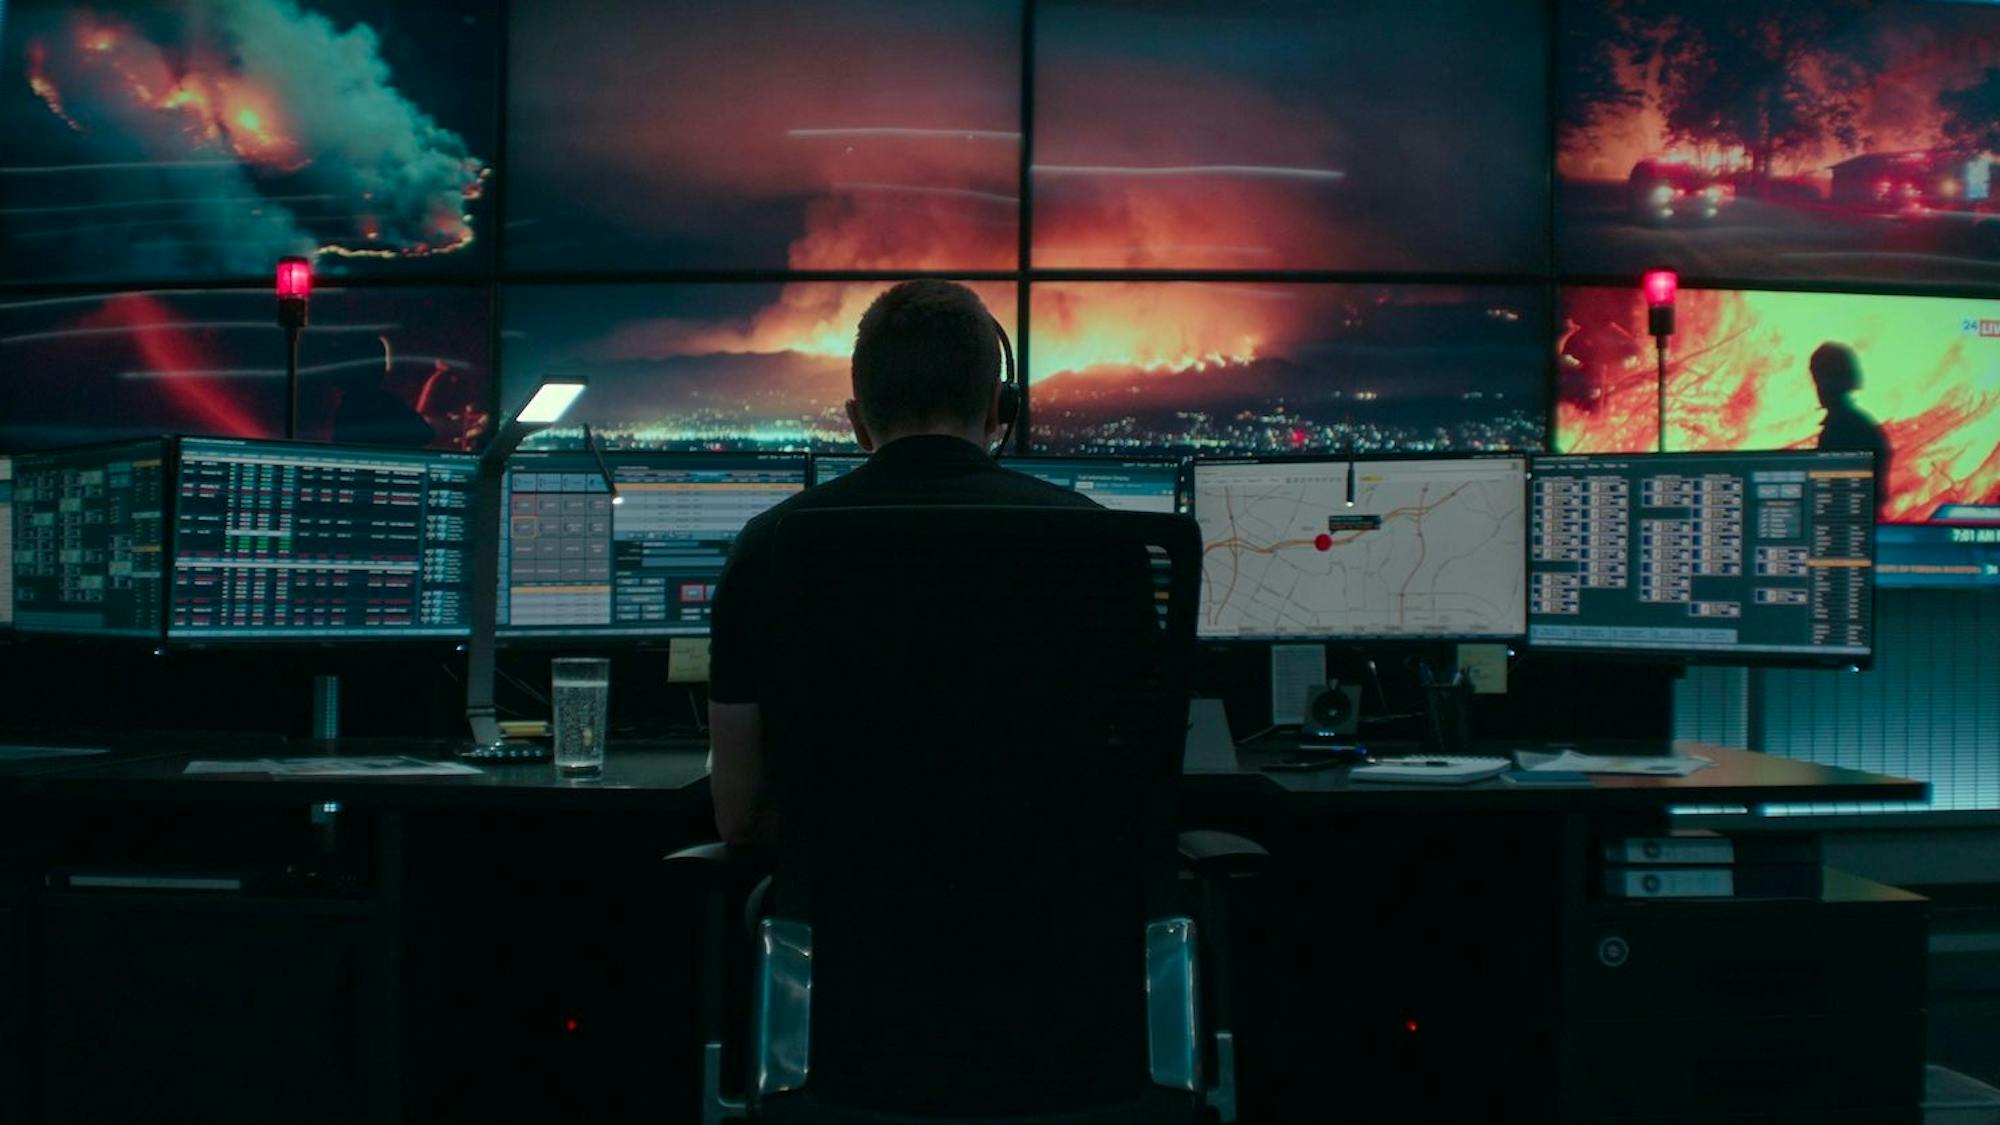 Joe Baylor wears a dark outfit and sits in front of a slew of desktop computers that show a fiery scene. 